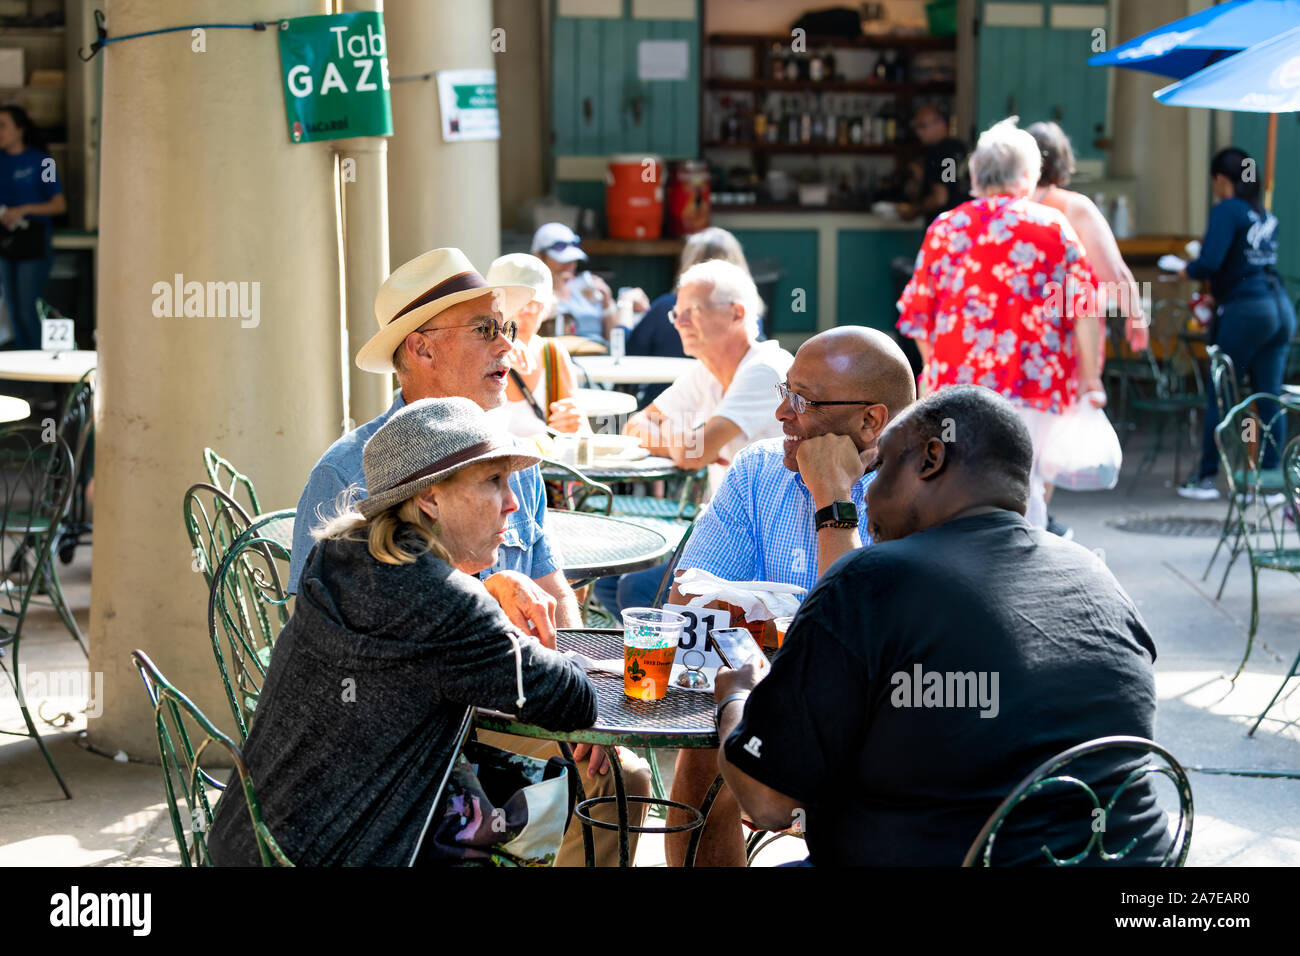 New Orleans, USA - April 23, 2018: People sitting eating cuisine food and beer at the Gazebo Cafe restaurant tables Stock Photo